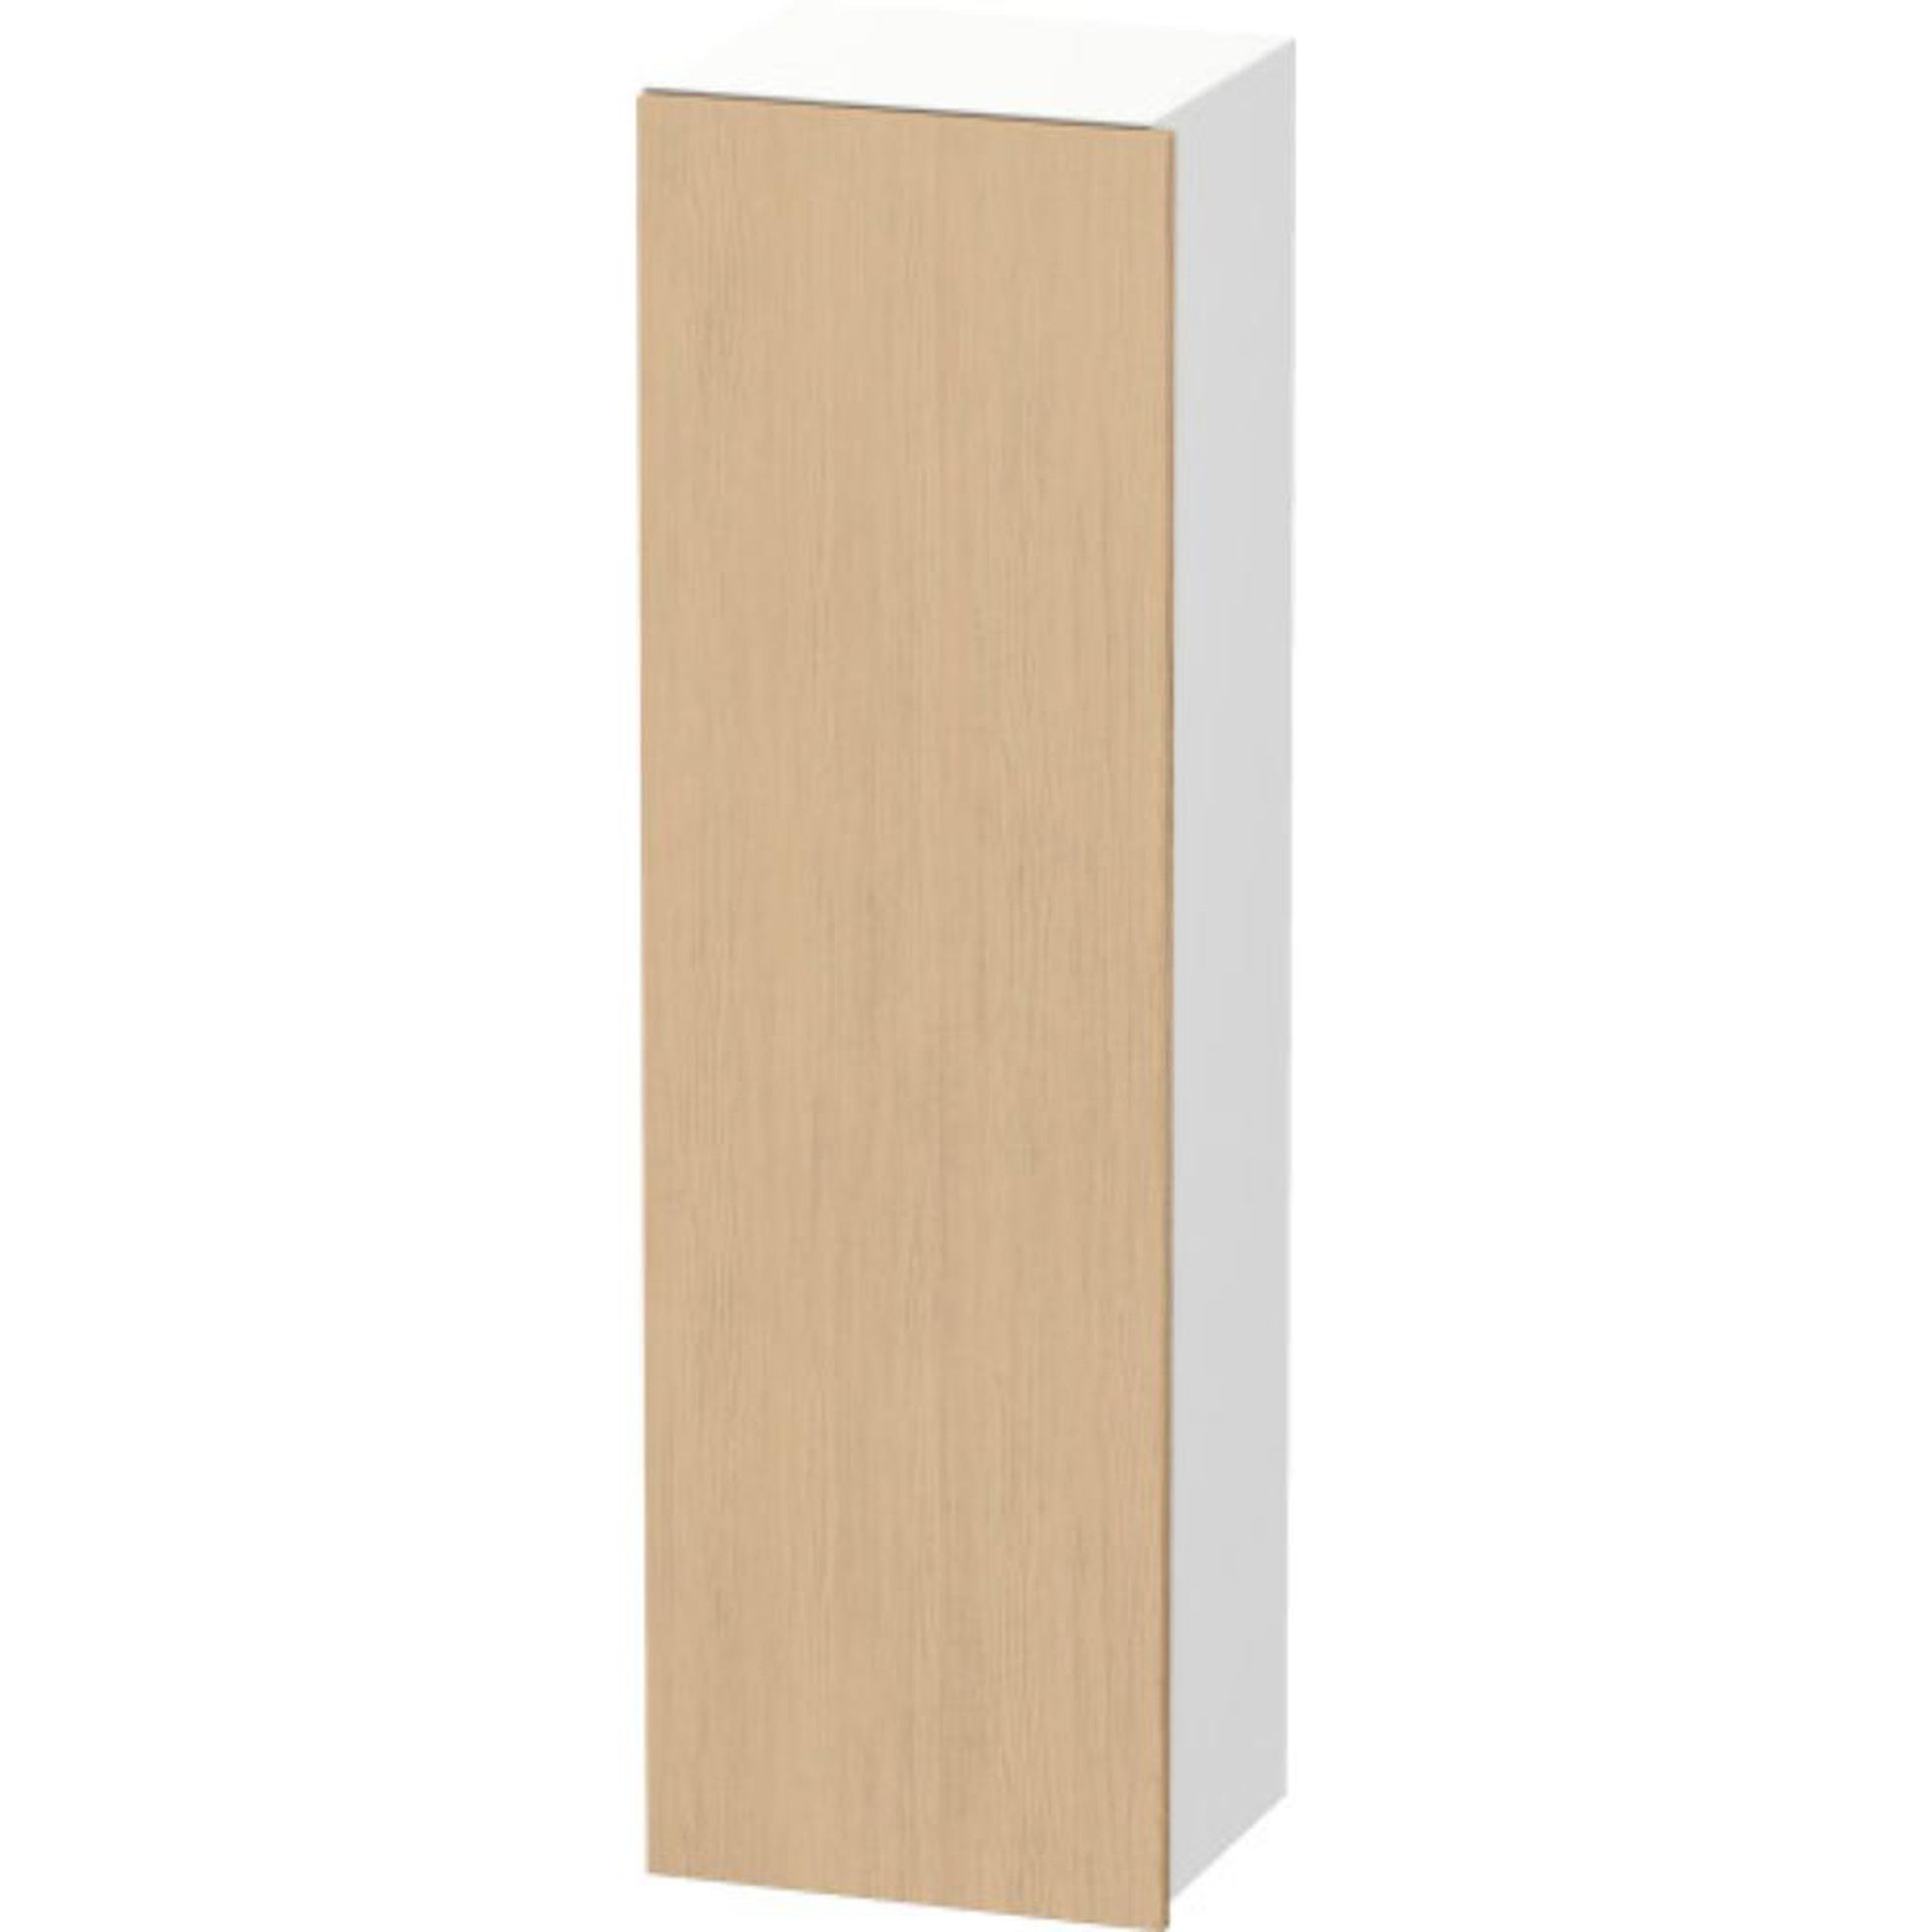 Duravit DuraStyle 16" x 55" x 14" Tall Cabinet With Left Hinge One Door in Natural Oak and White (DS1219L3018)